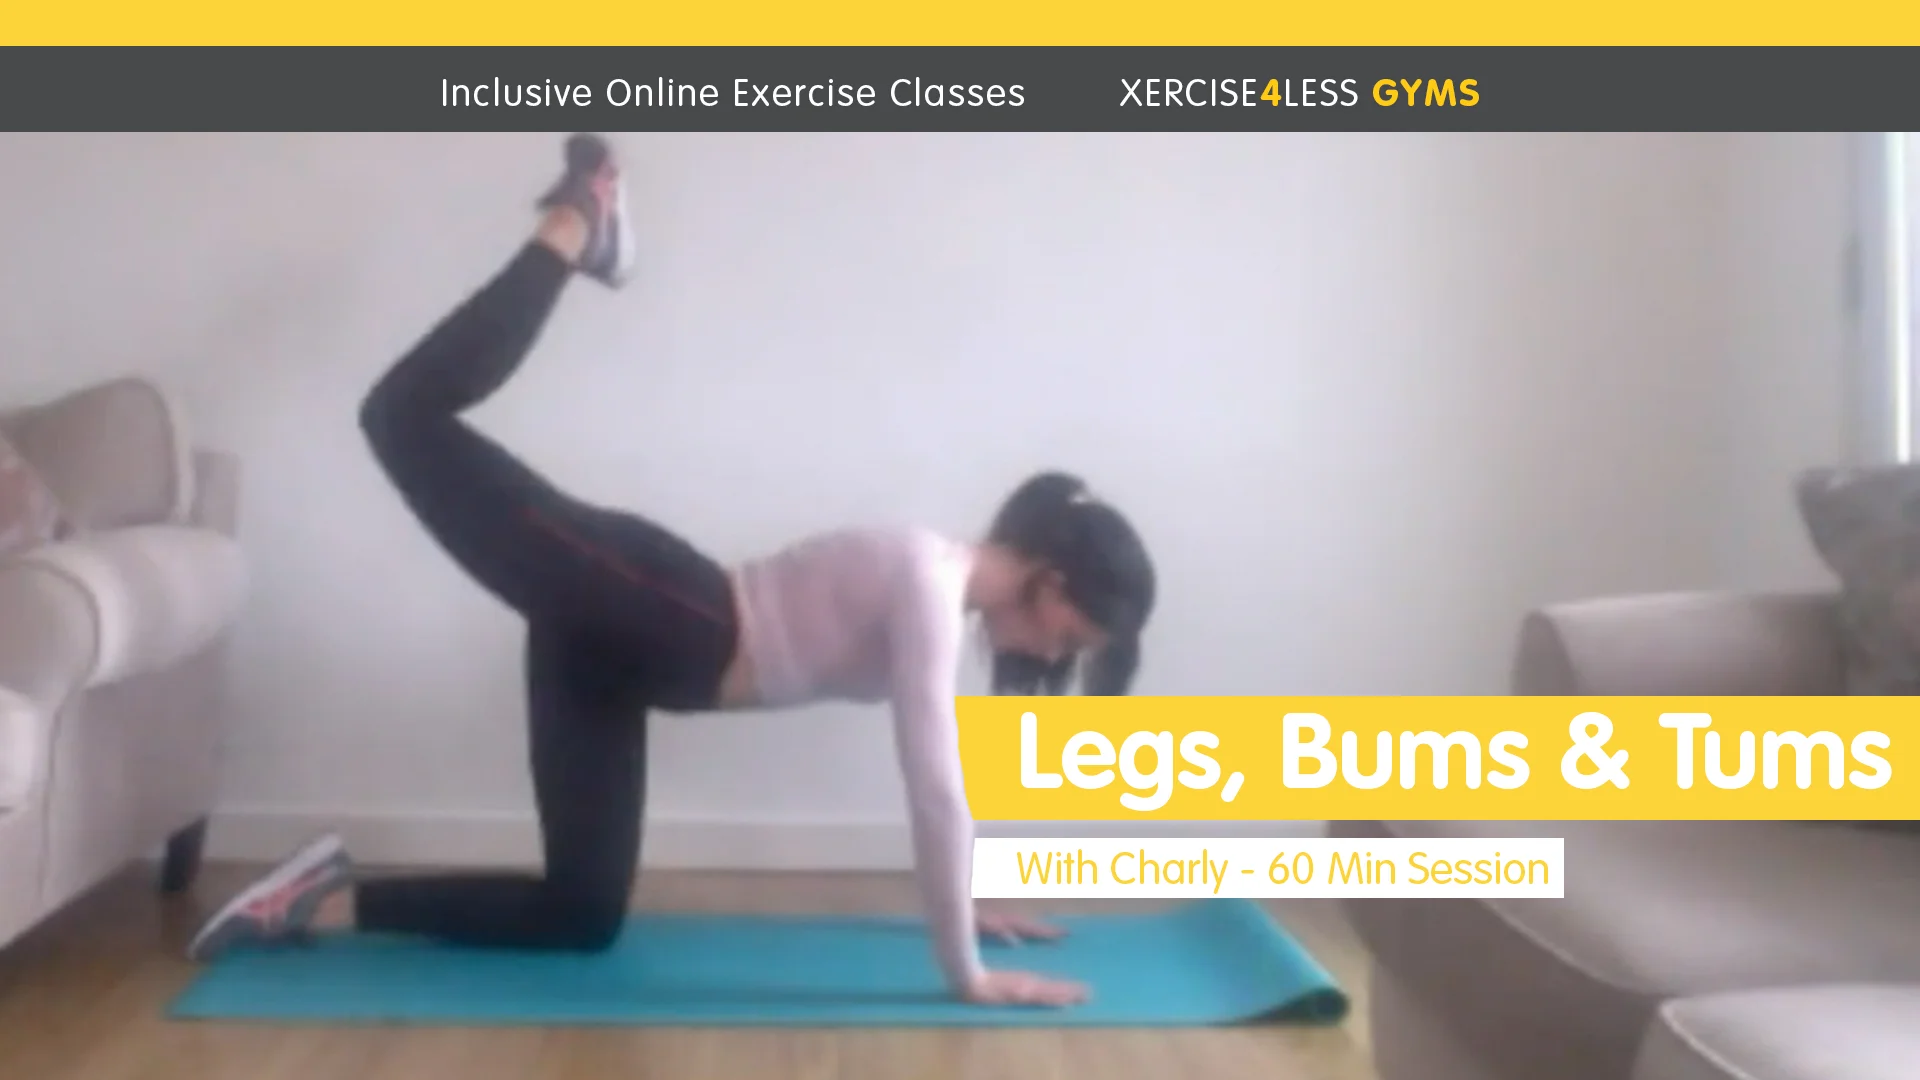 03/05 - Legs, Bums and Tums Class - Charly - 11am Sunday - 60m